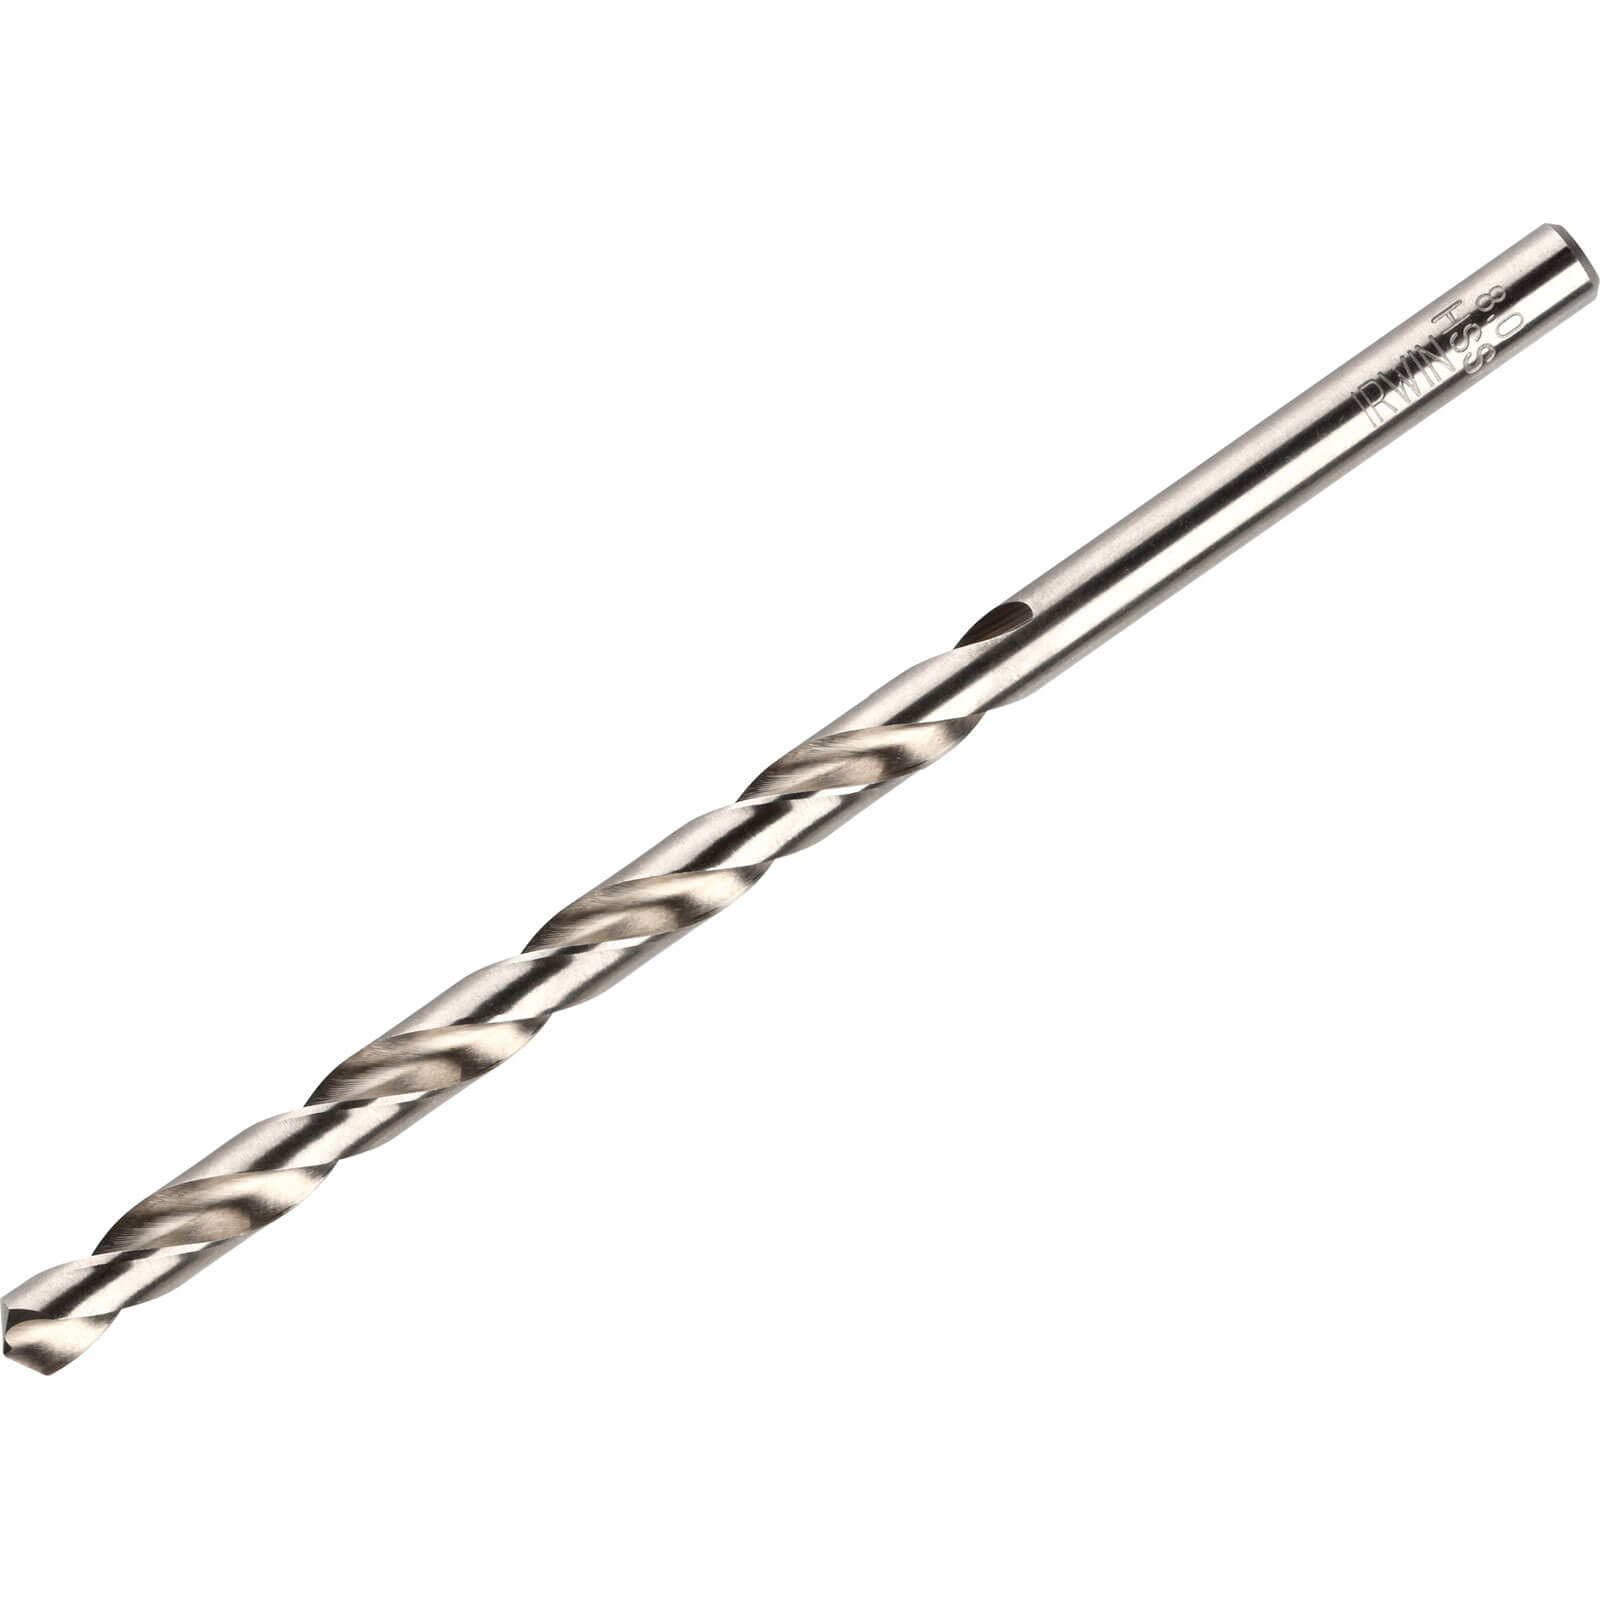 Photo of Irwin Hss Long Pro Drill Bits 4mm Pack Of 10